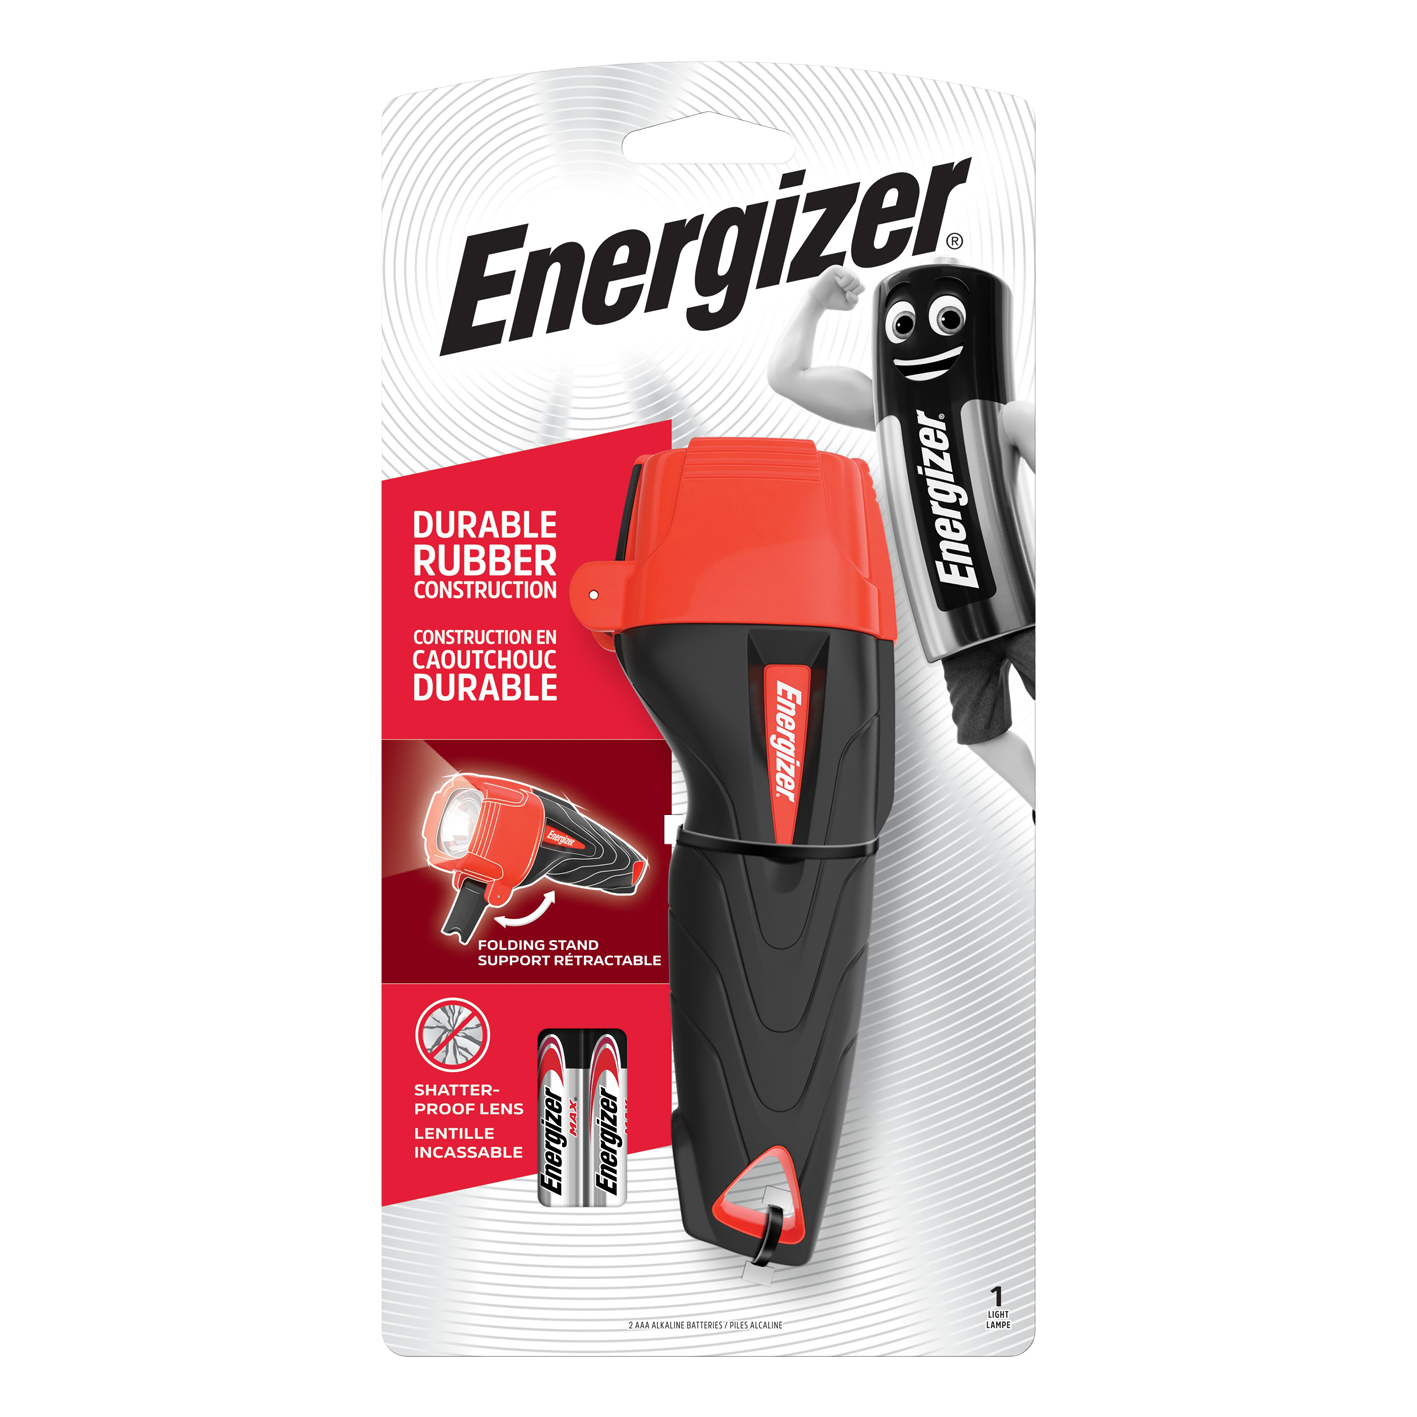 Energizer LED Impact Torch With 2 x AAA Batteries